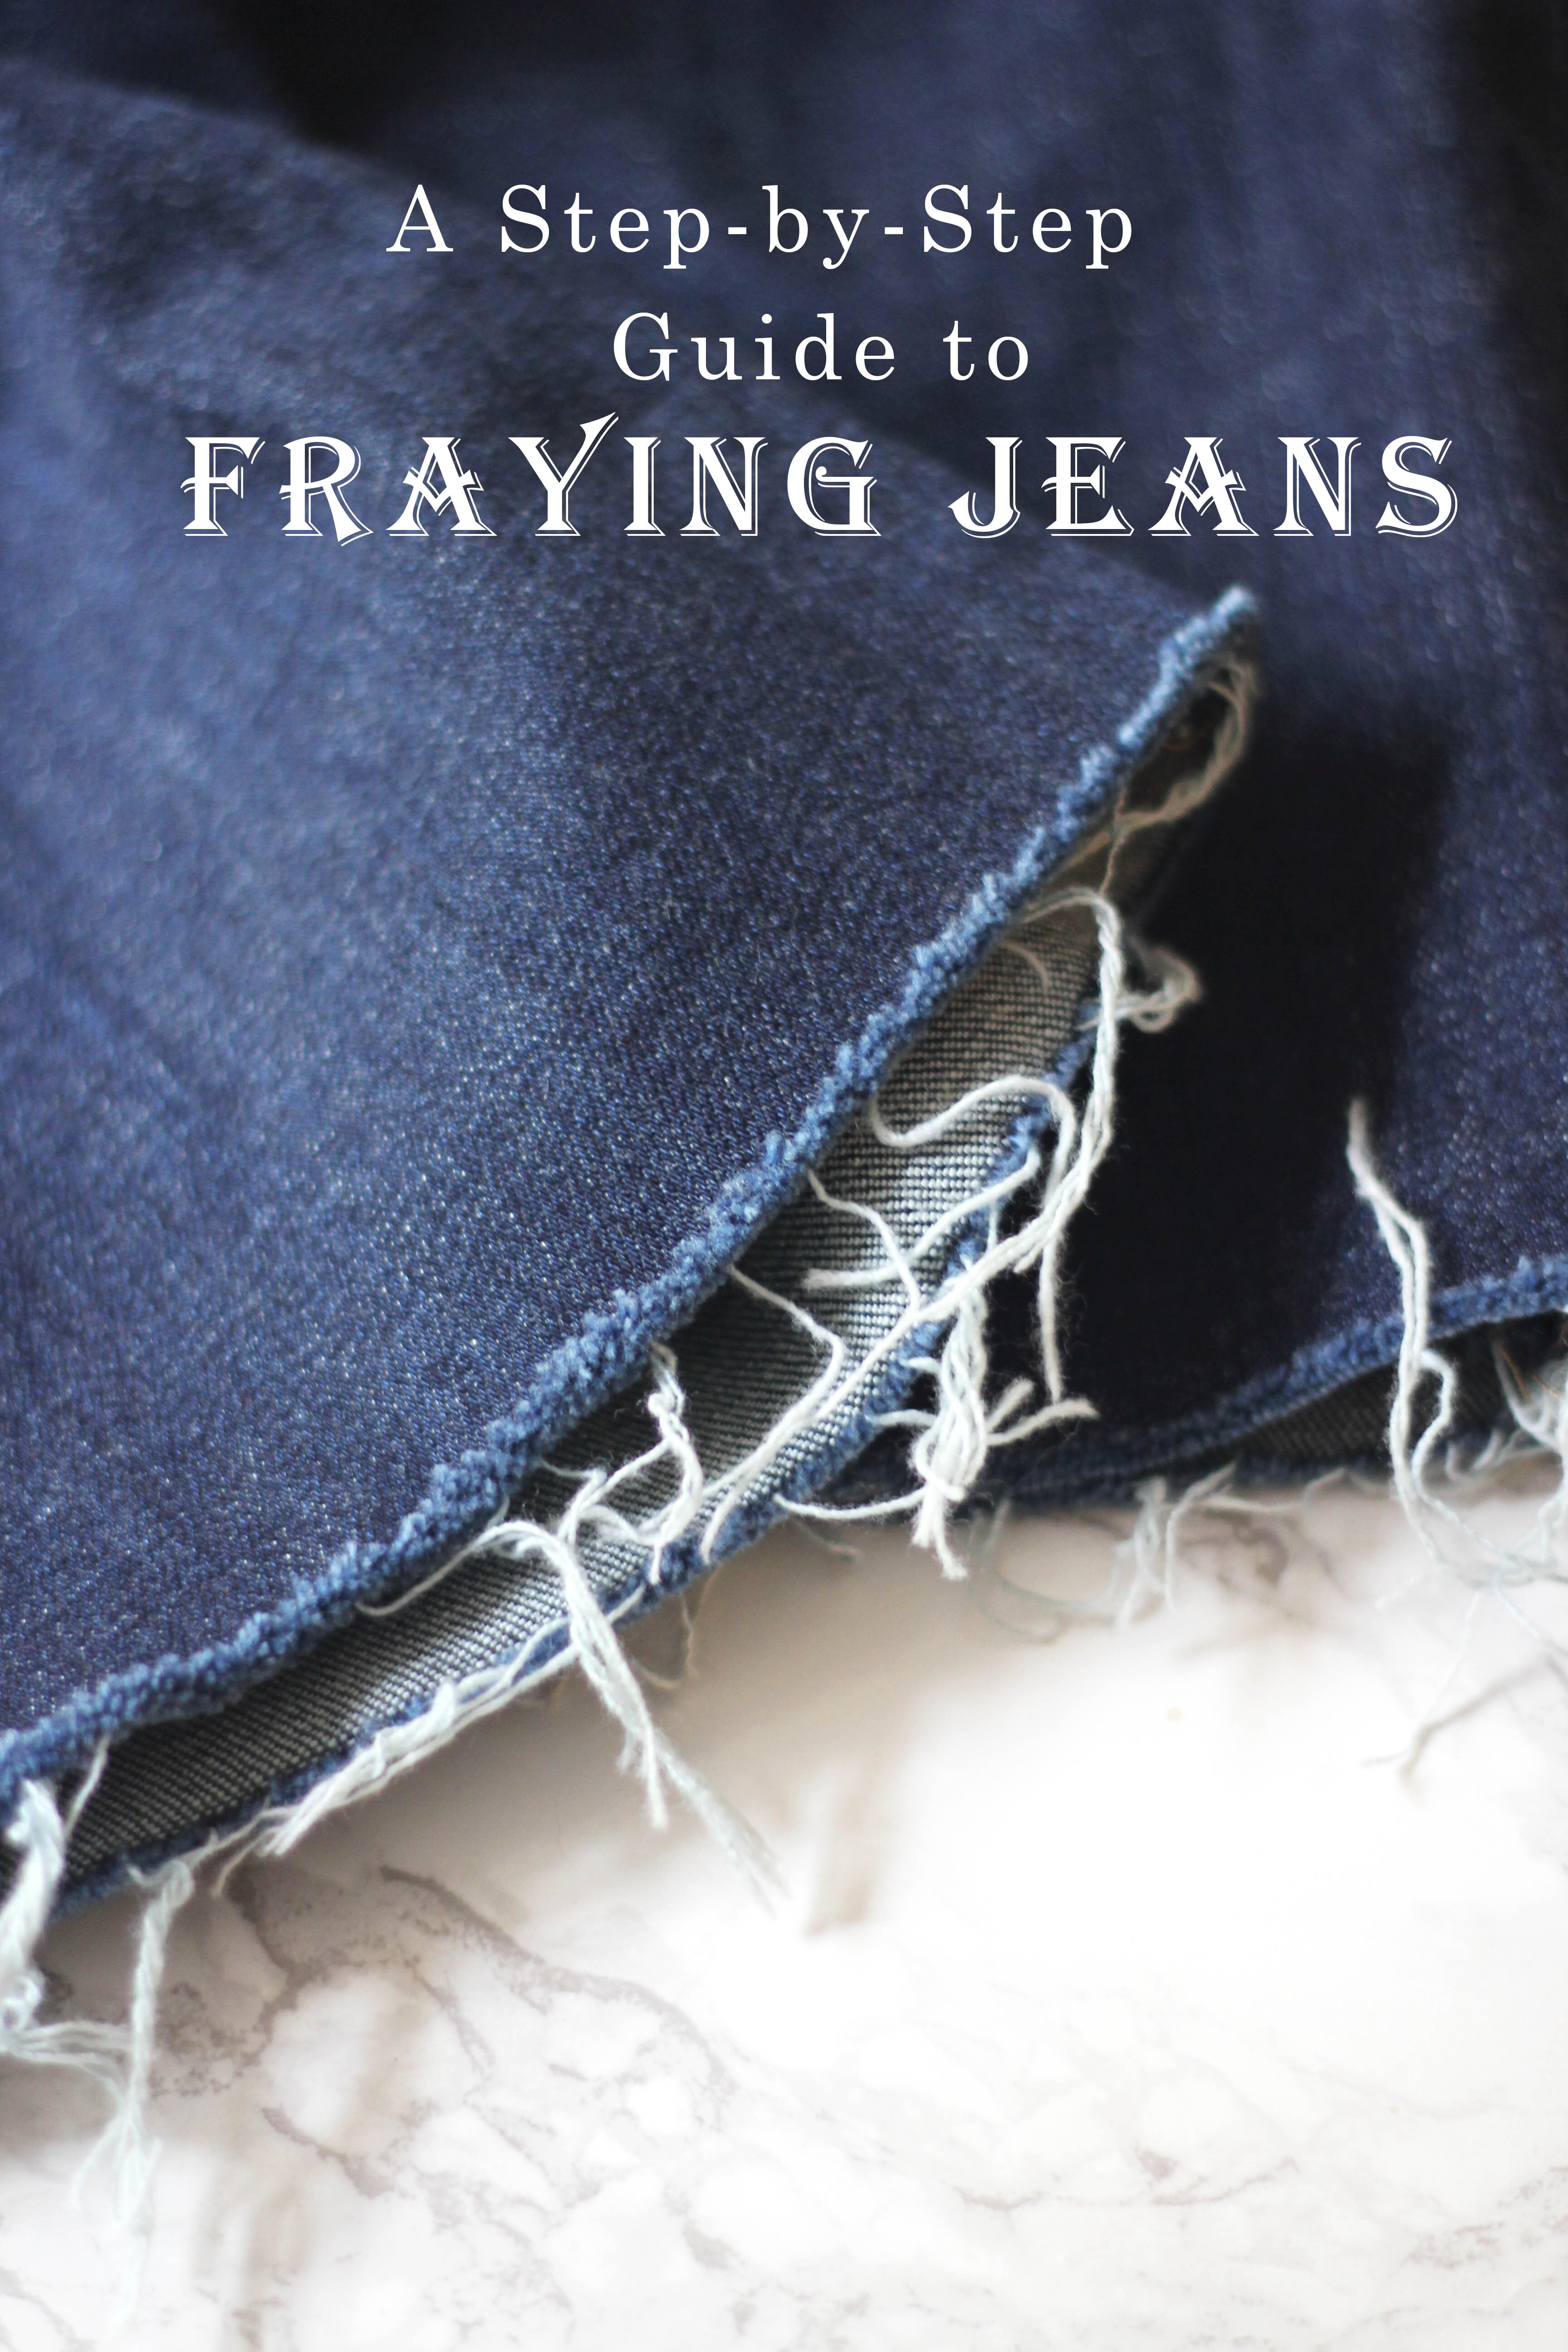 Fray Jeans Cover IMG 0589